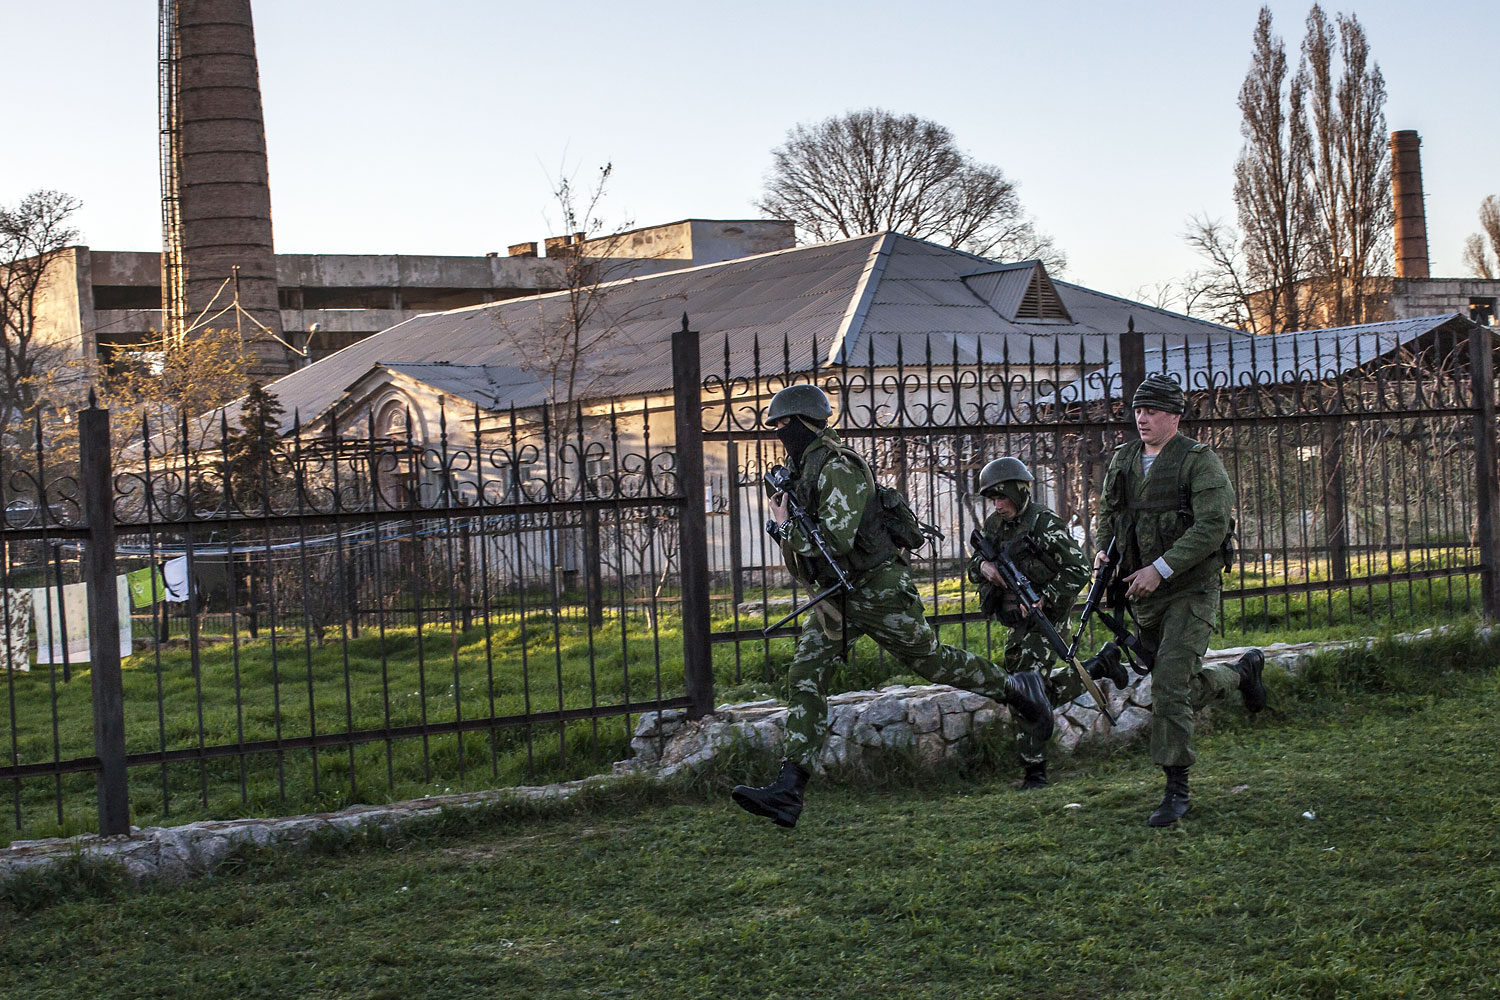 Russian forces storm a Ukrainian military base in the village of Belbek, Crimea, March 22, 2014. (Mauricio Lima—The New York Times/Redux)